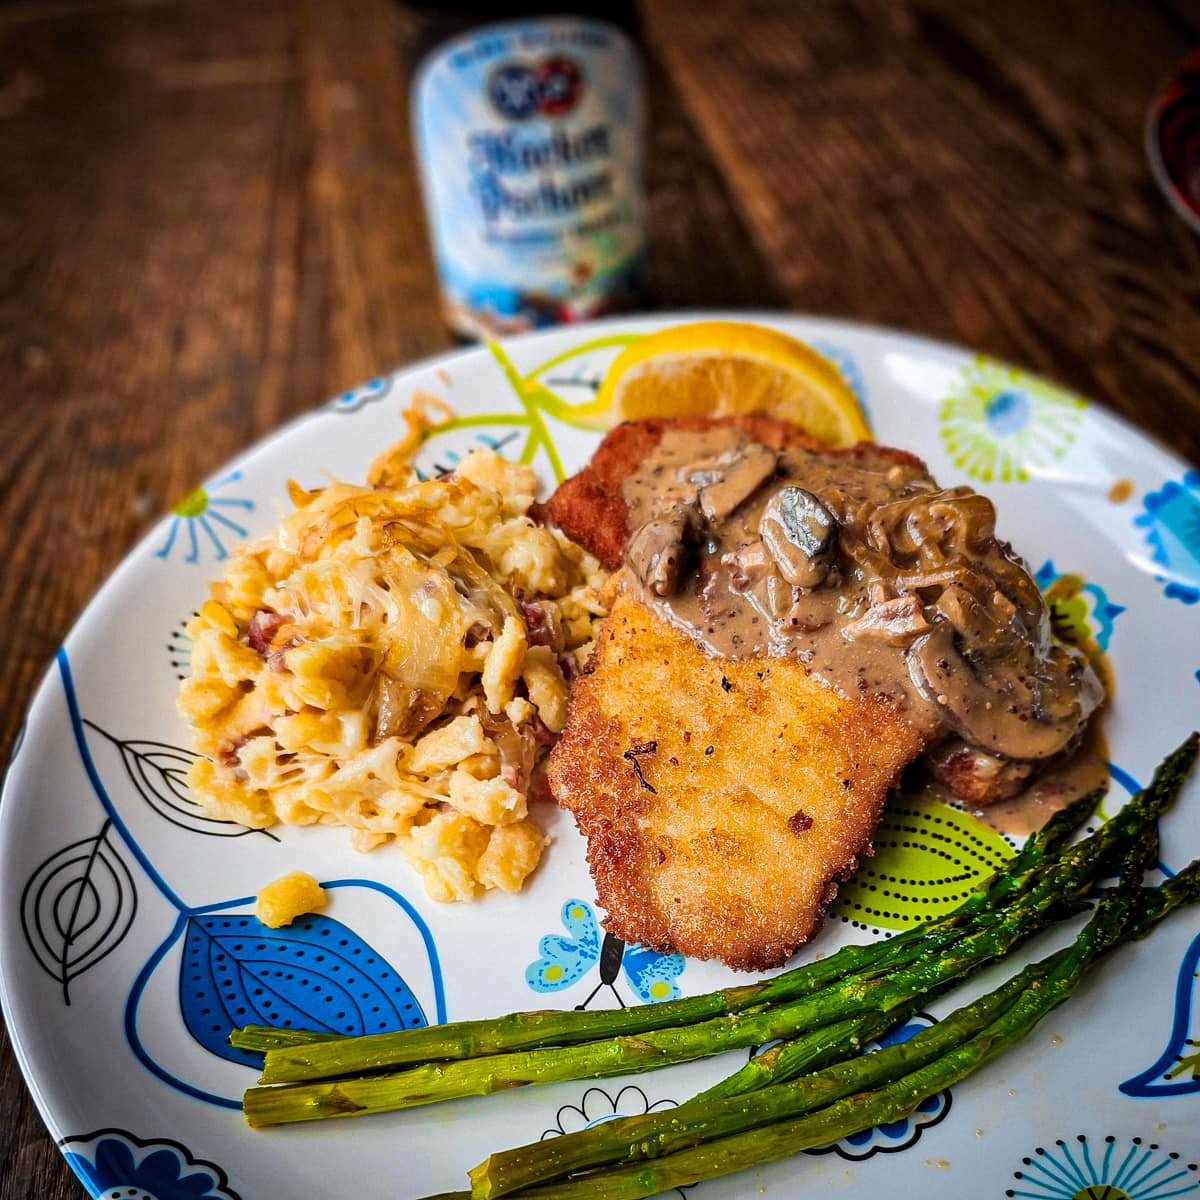 Pork schnitzel with a Jager sauce, asparagus, and cheese spätzle. 